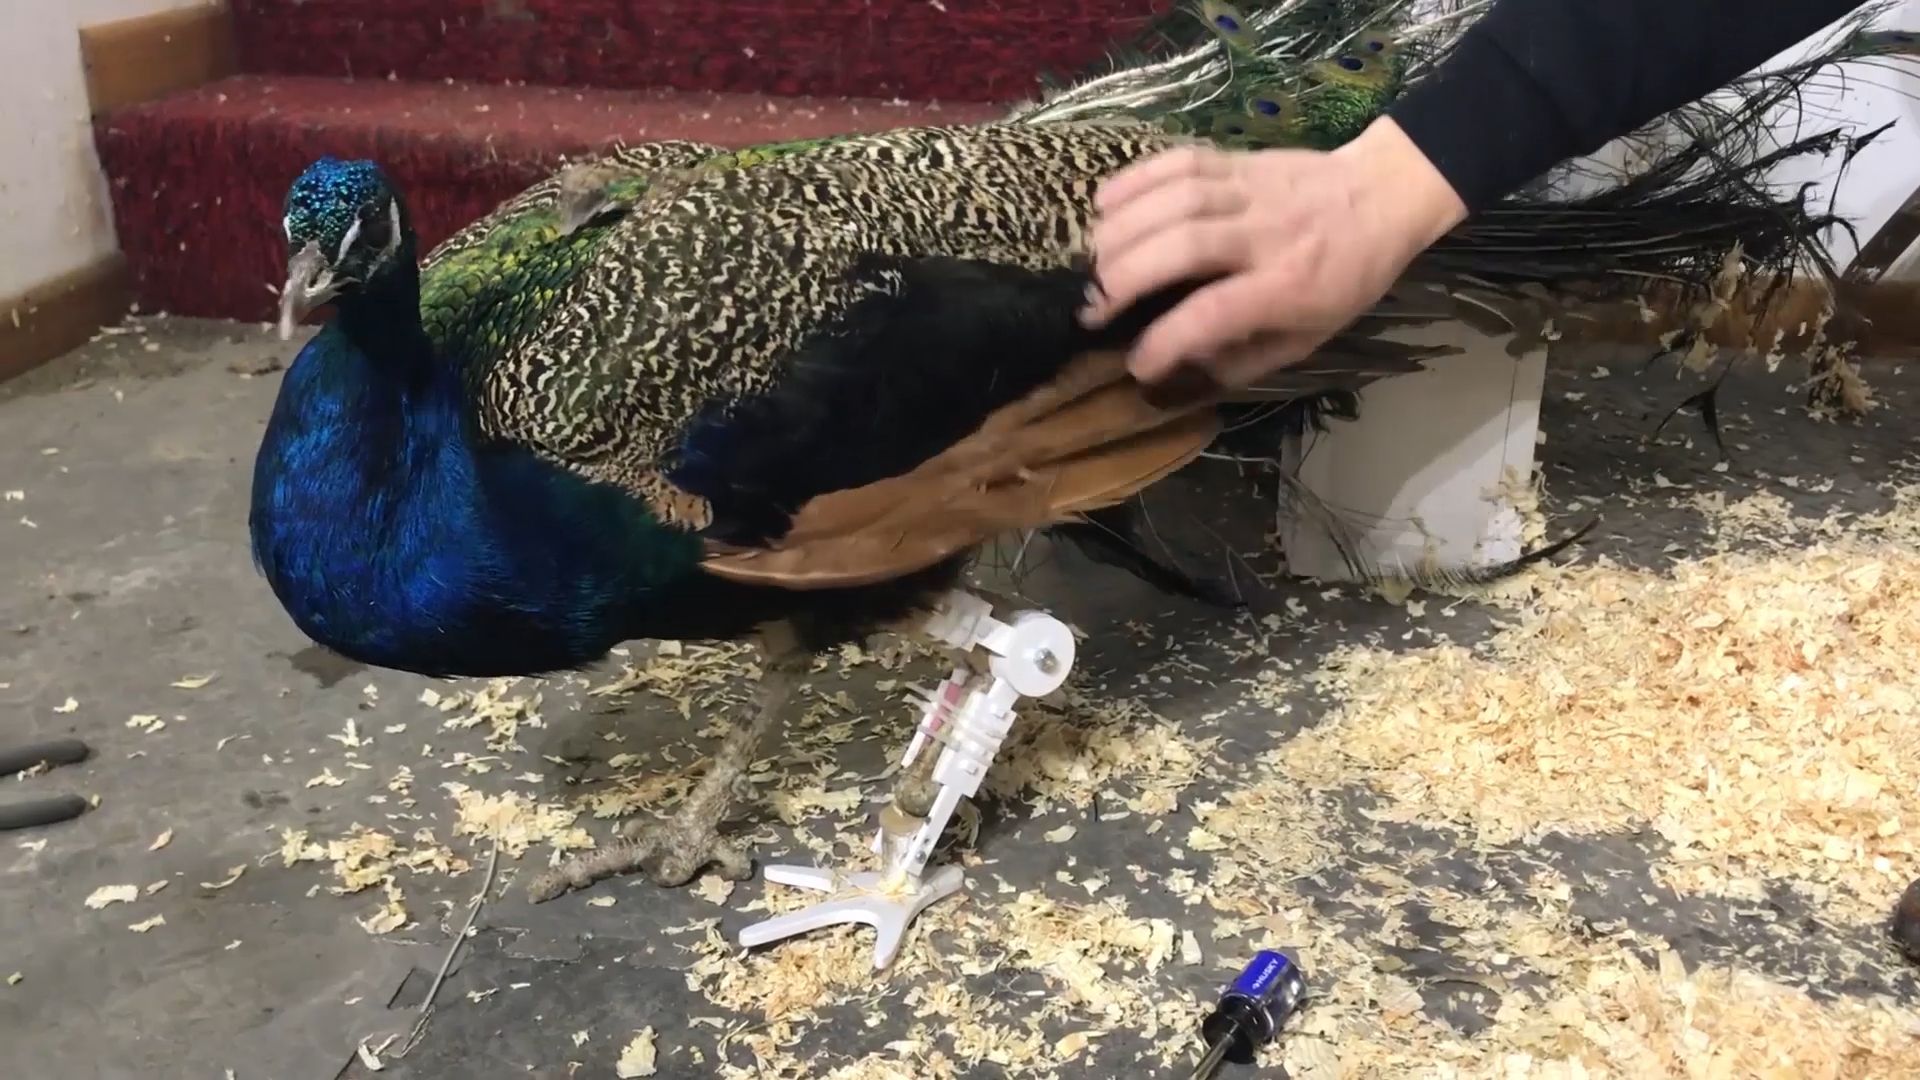 Leg from the 3D printer: rescue for injured peacock